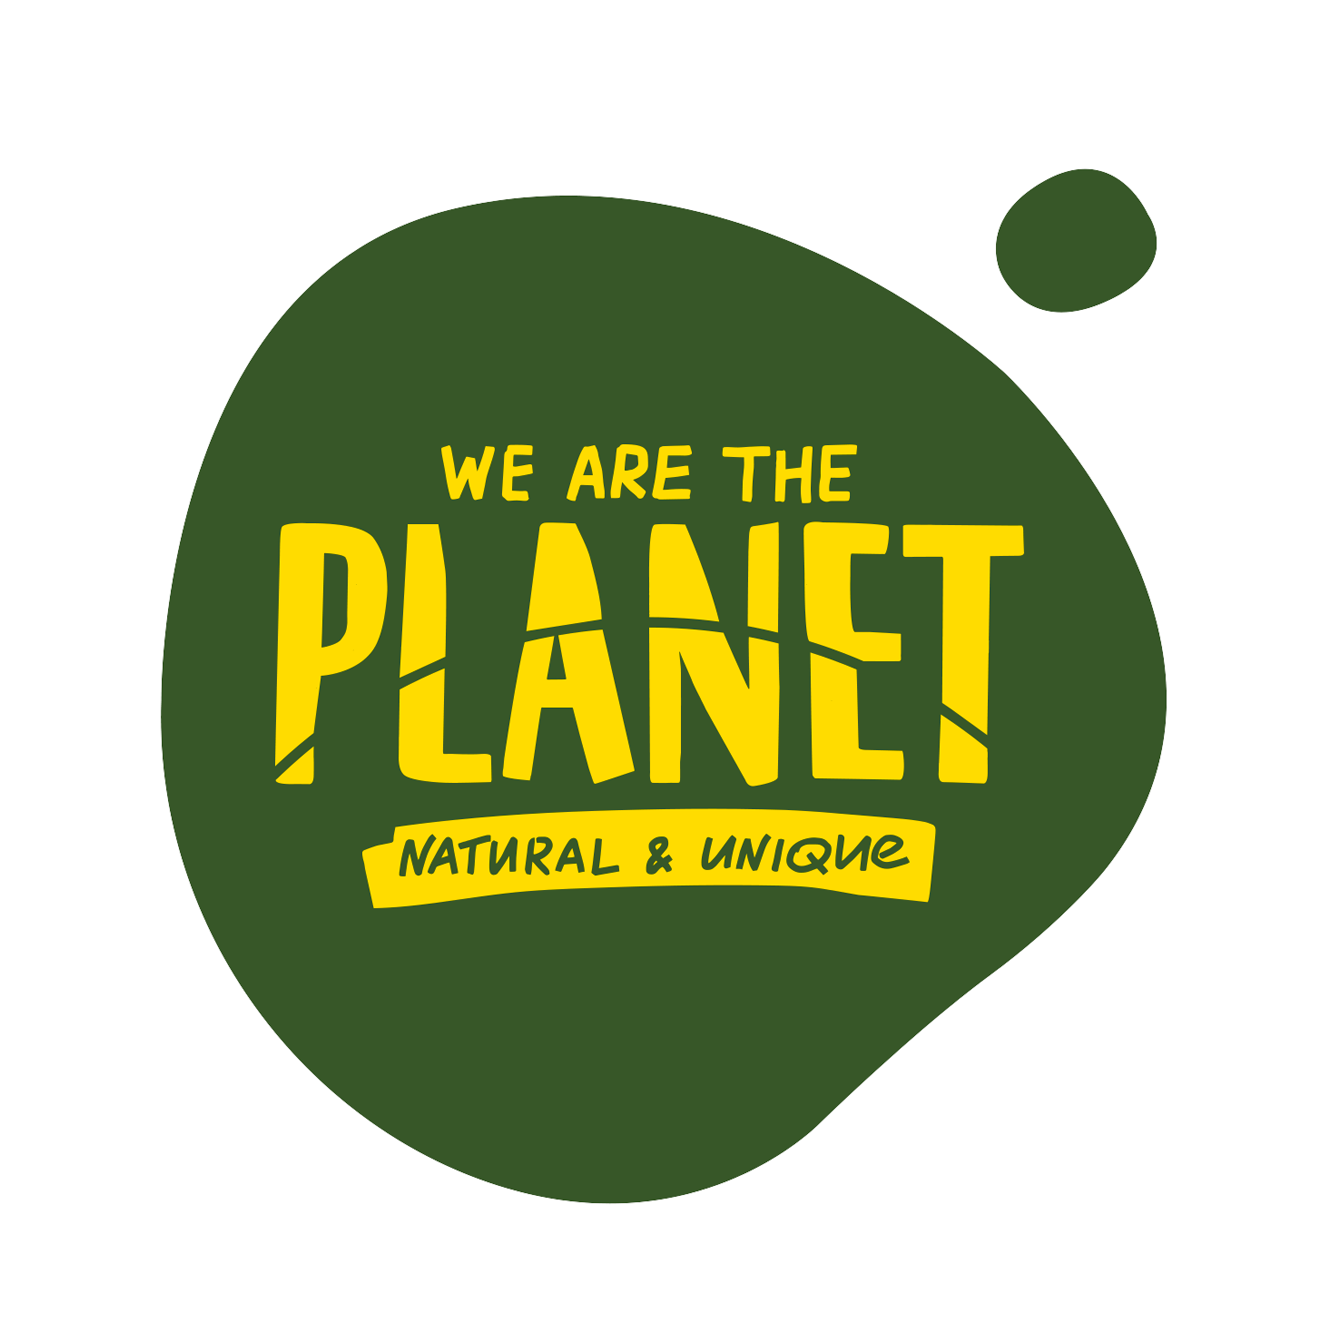 we are the planet